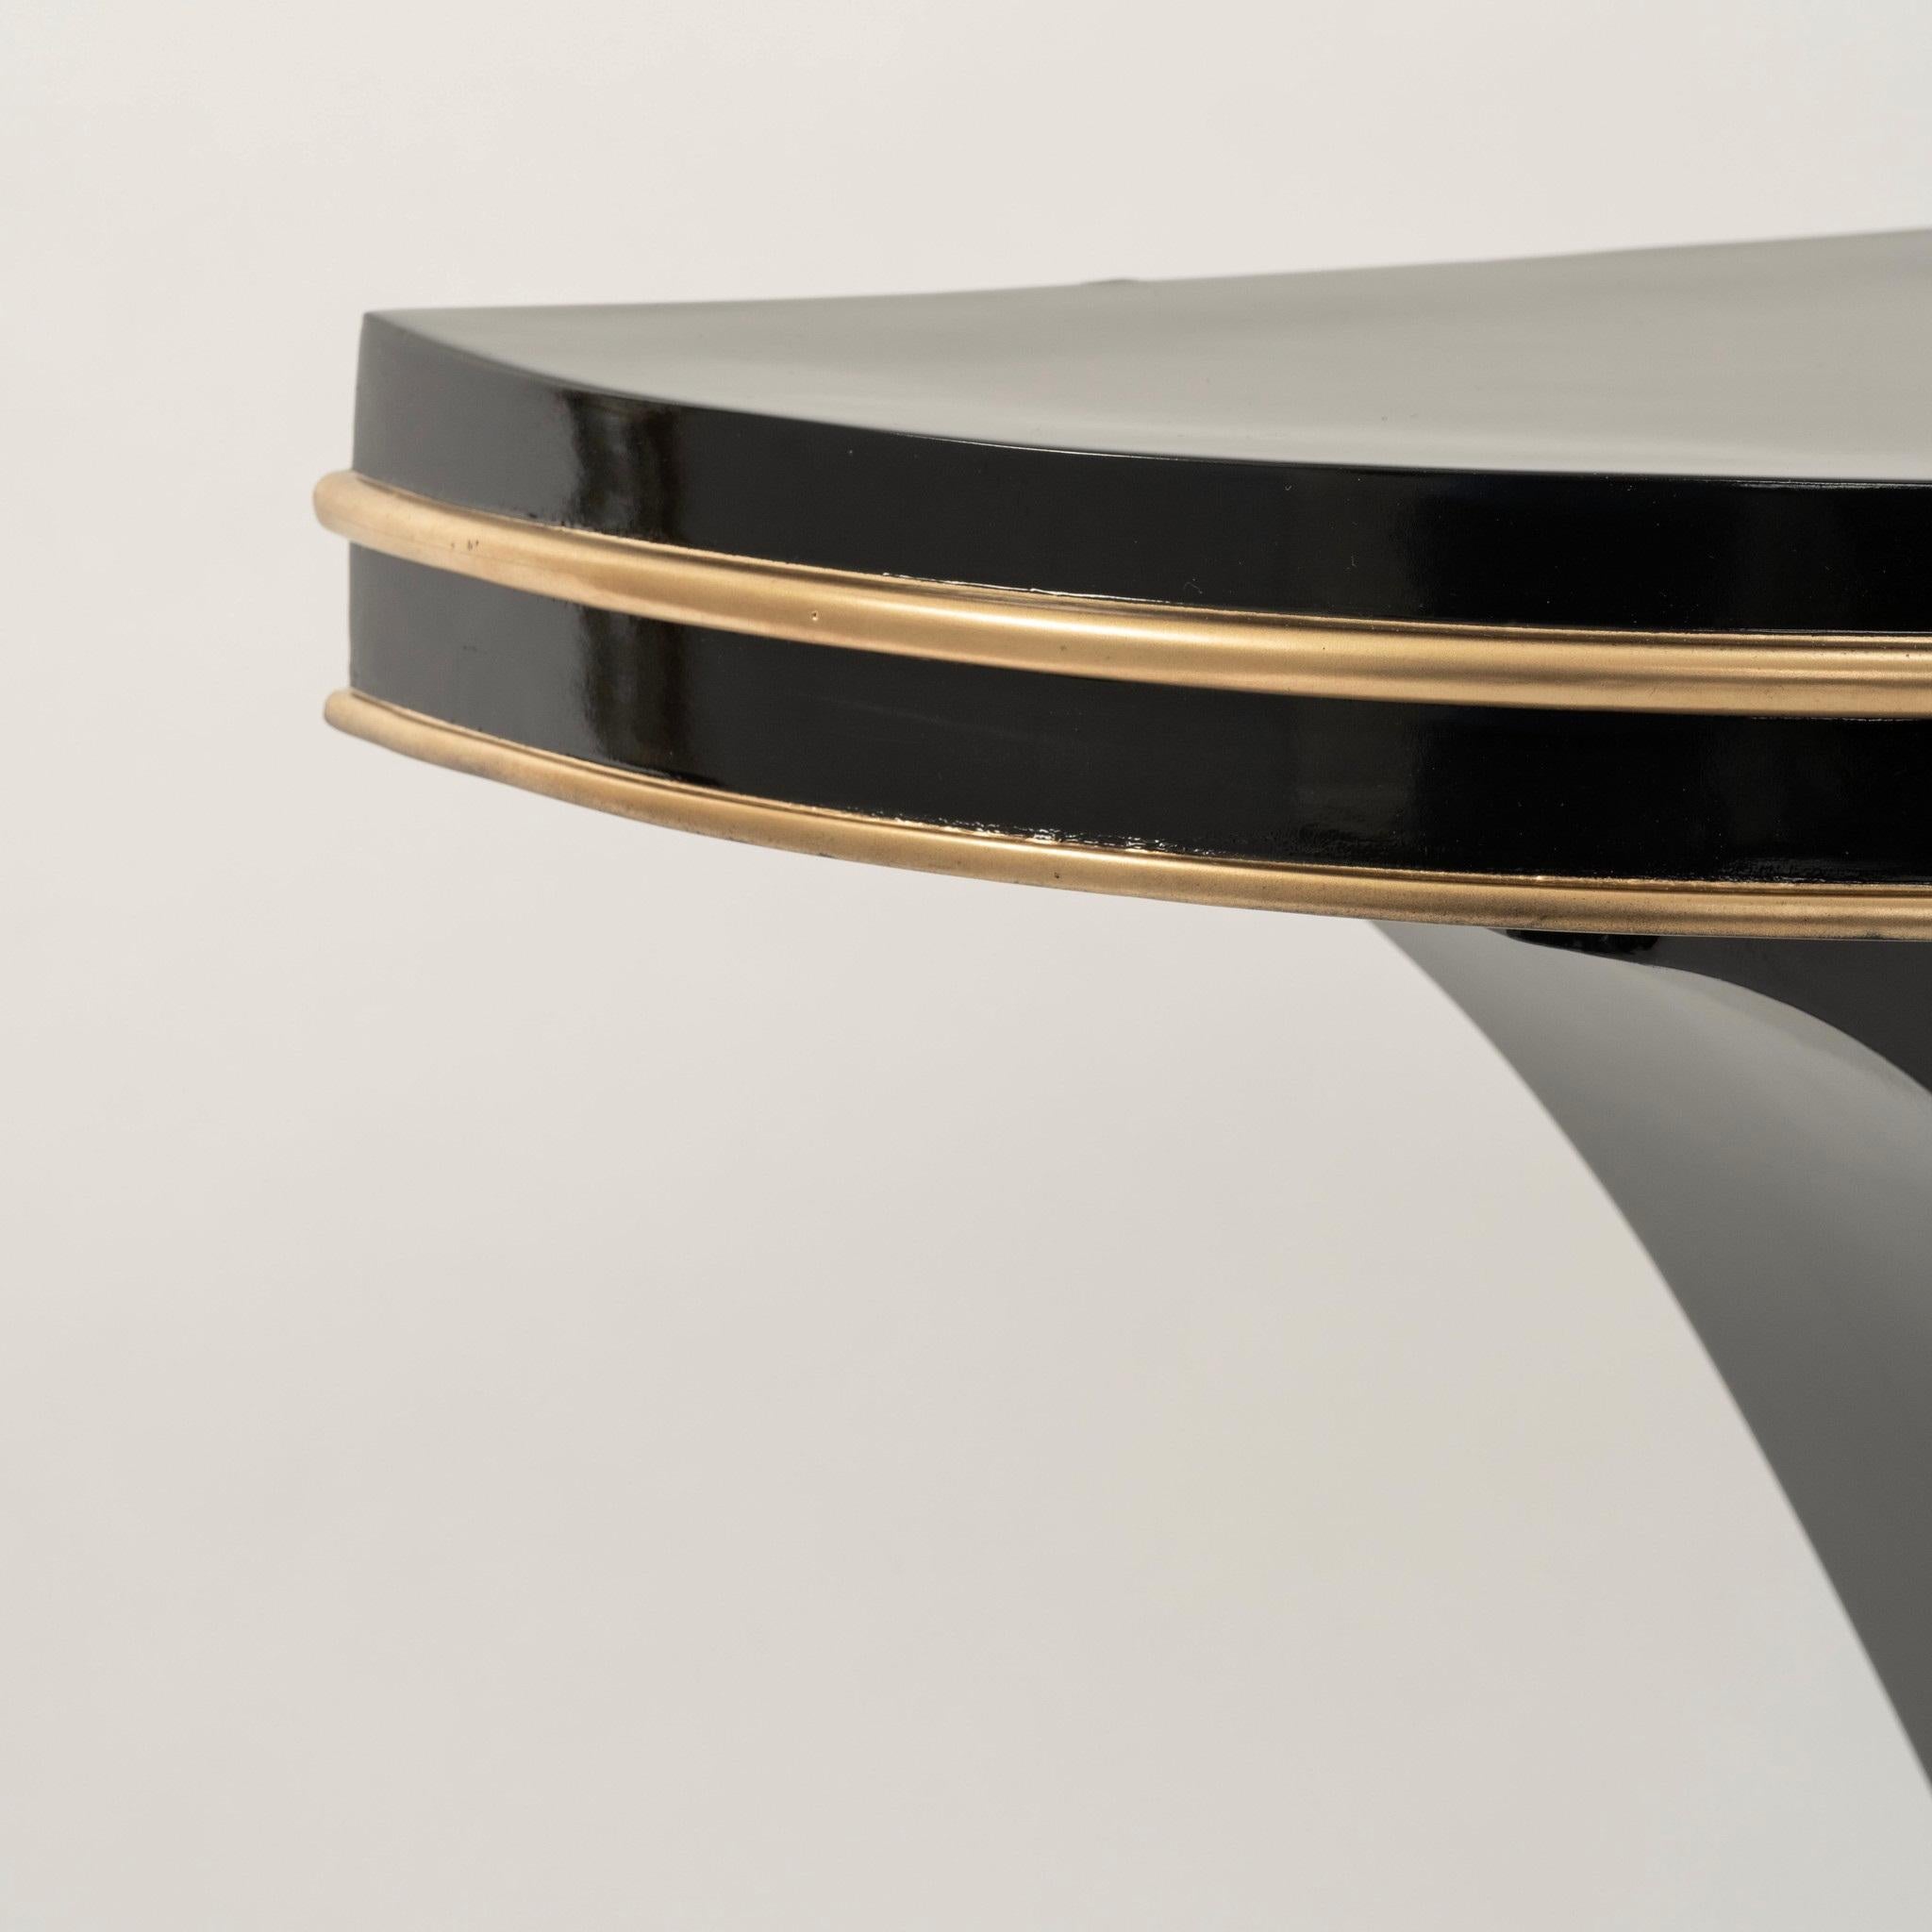 20th century black lacquered Art Deco style console with gold accents.